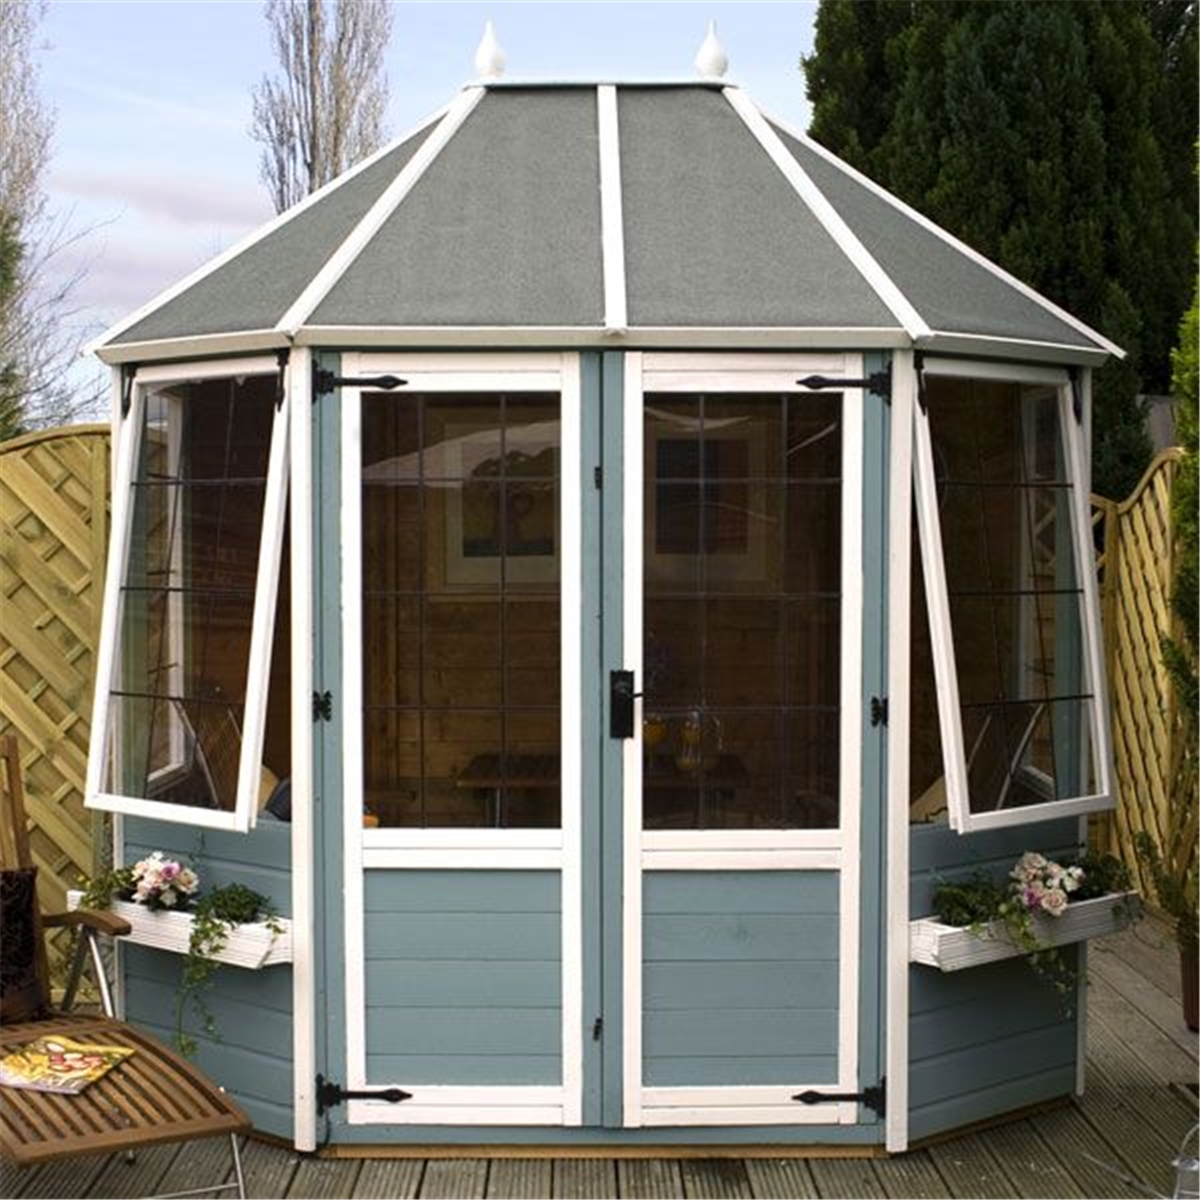 8 x 6 Avon Octagonal Summerhouse (12mm Tongue and Groove ...